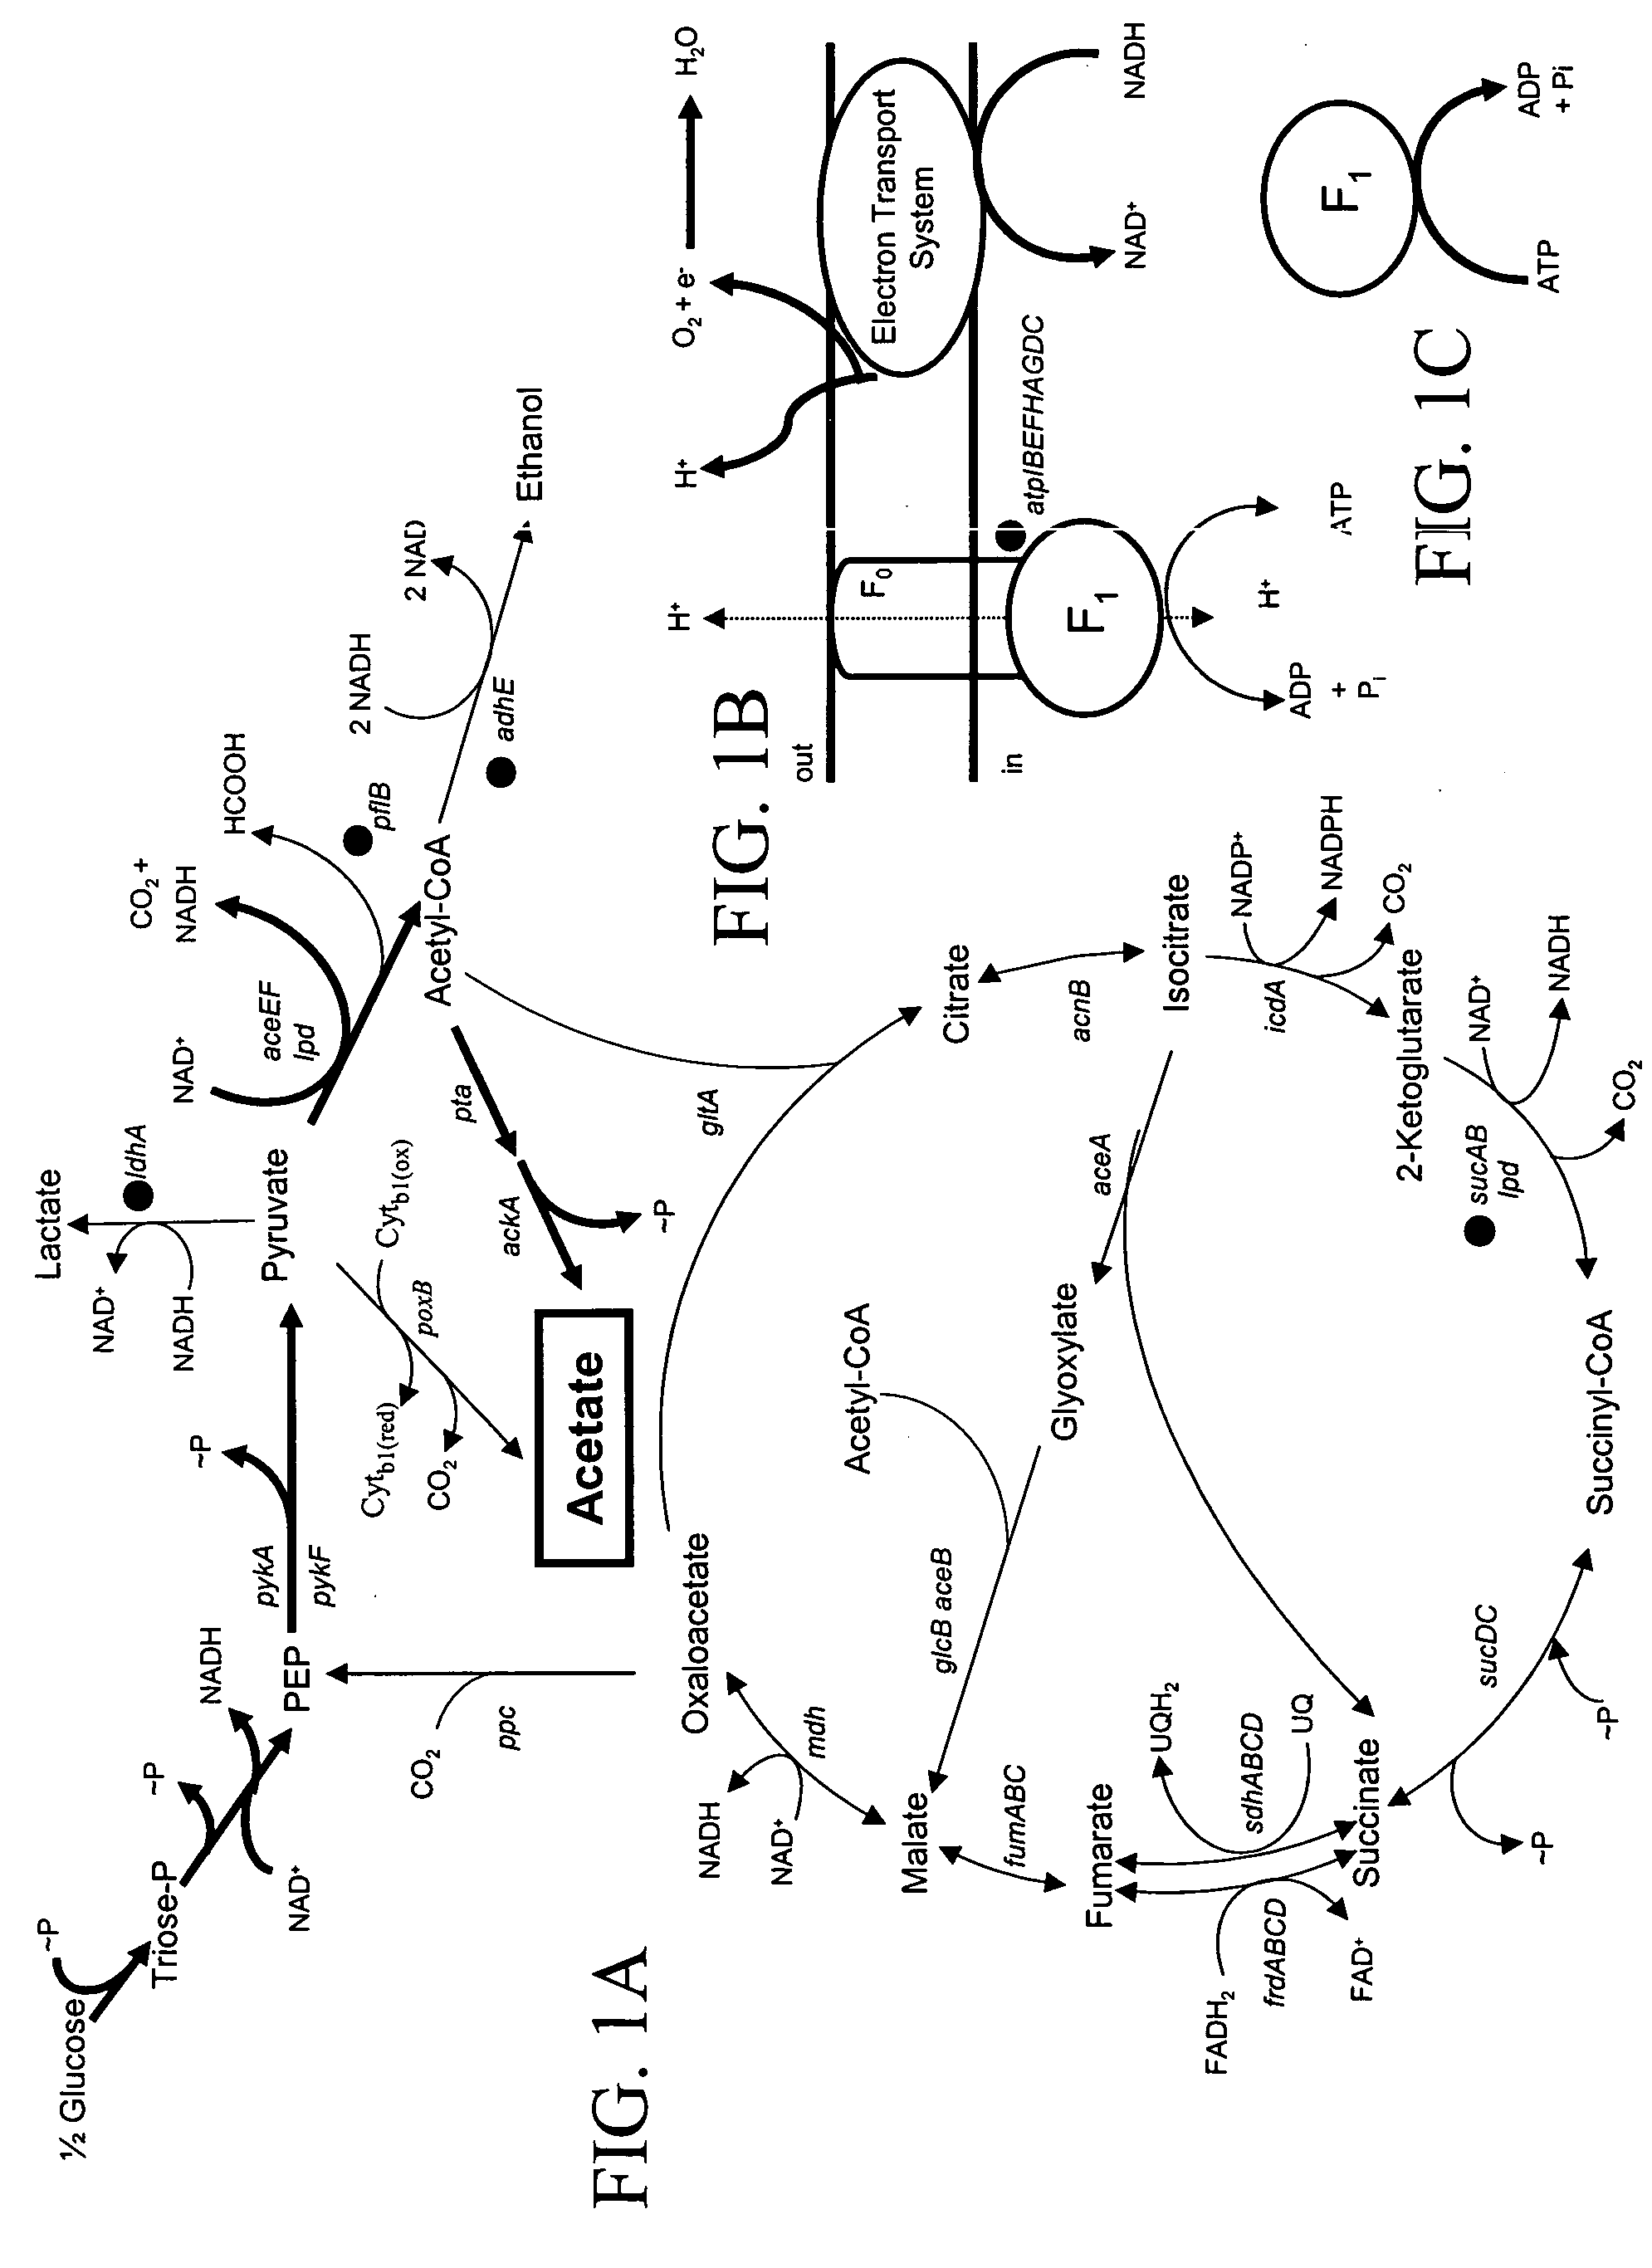 Materials and methods for the efficient production of acetate and other products